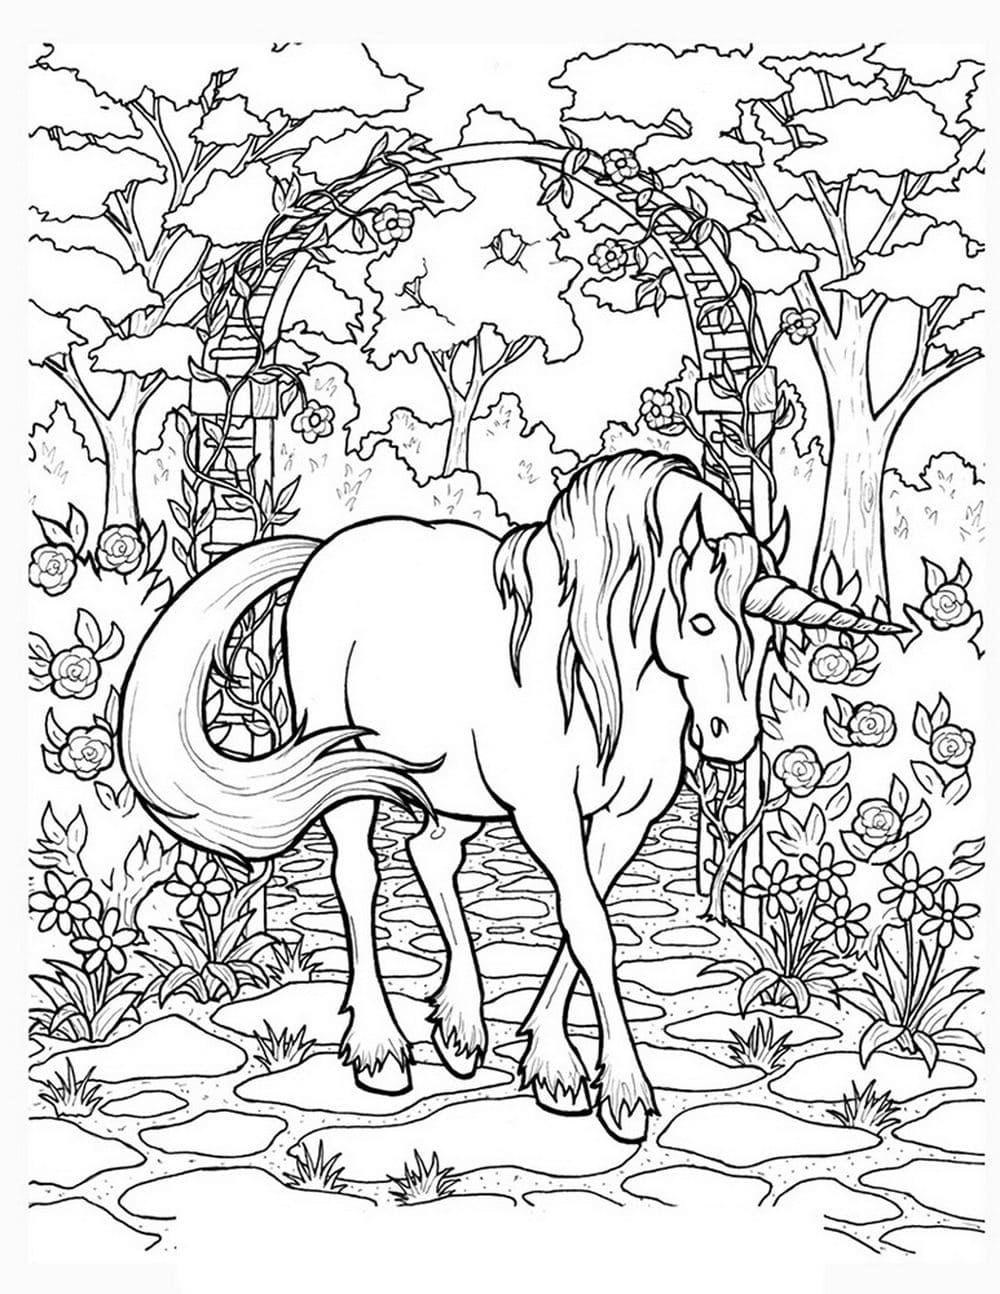 Unicorn In The Garden Coloring Page